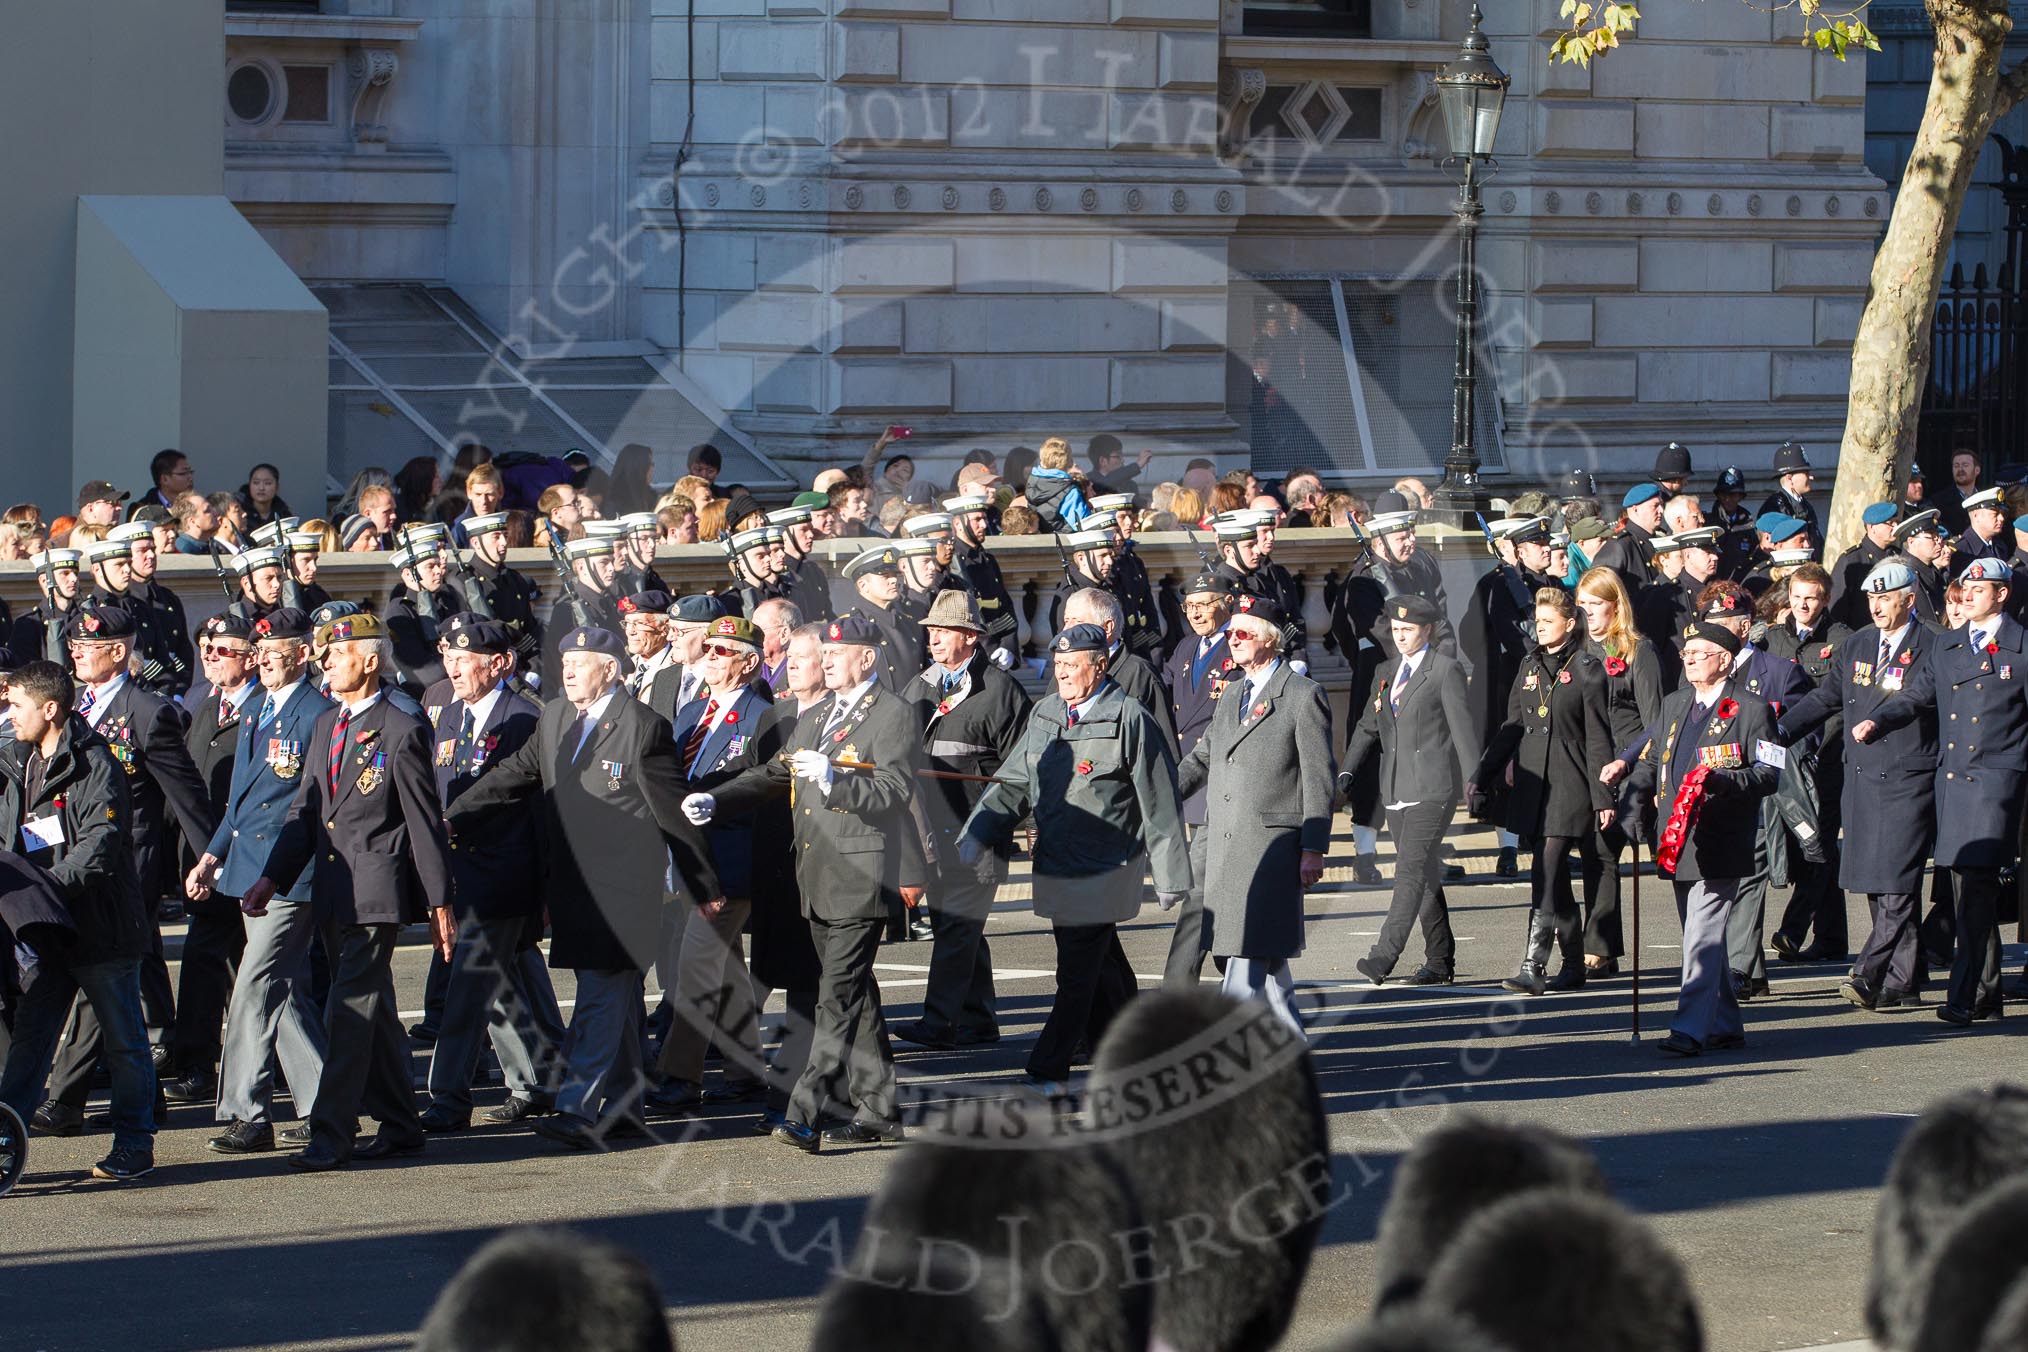 Remembrance Sunday 2012 Cenotaph March Past: Group F10 - National Service Veterans Alliance and F11 - Italy Star Association..
Whitehall, Cenotaph,
London SW1,

United Kingdom,
on 11 November 2012 at 11:46, image #456